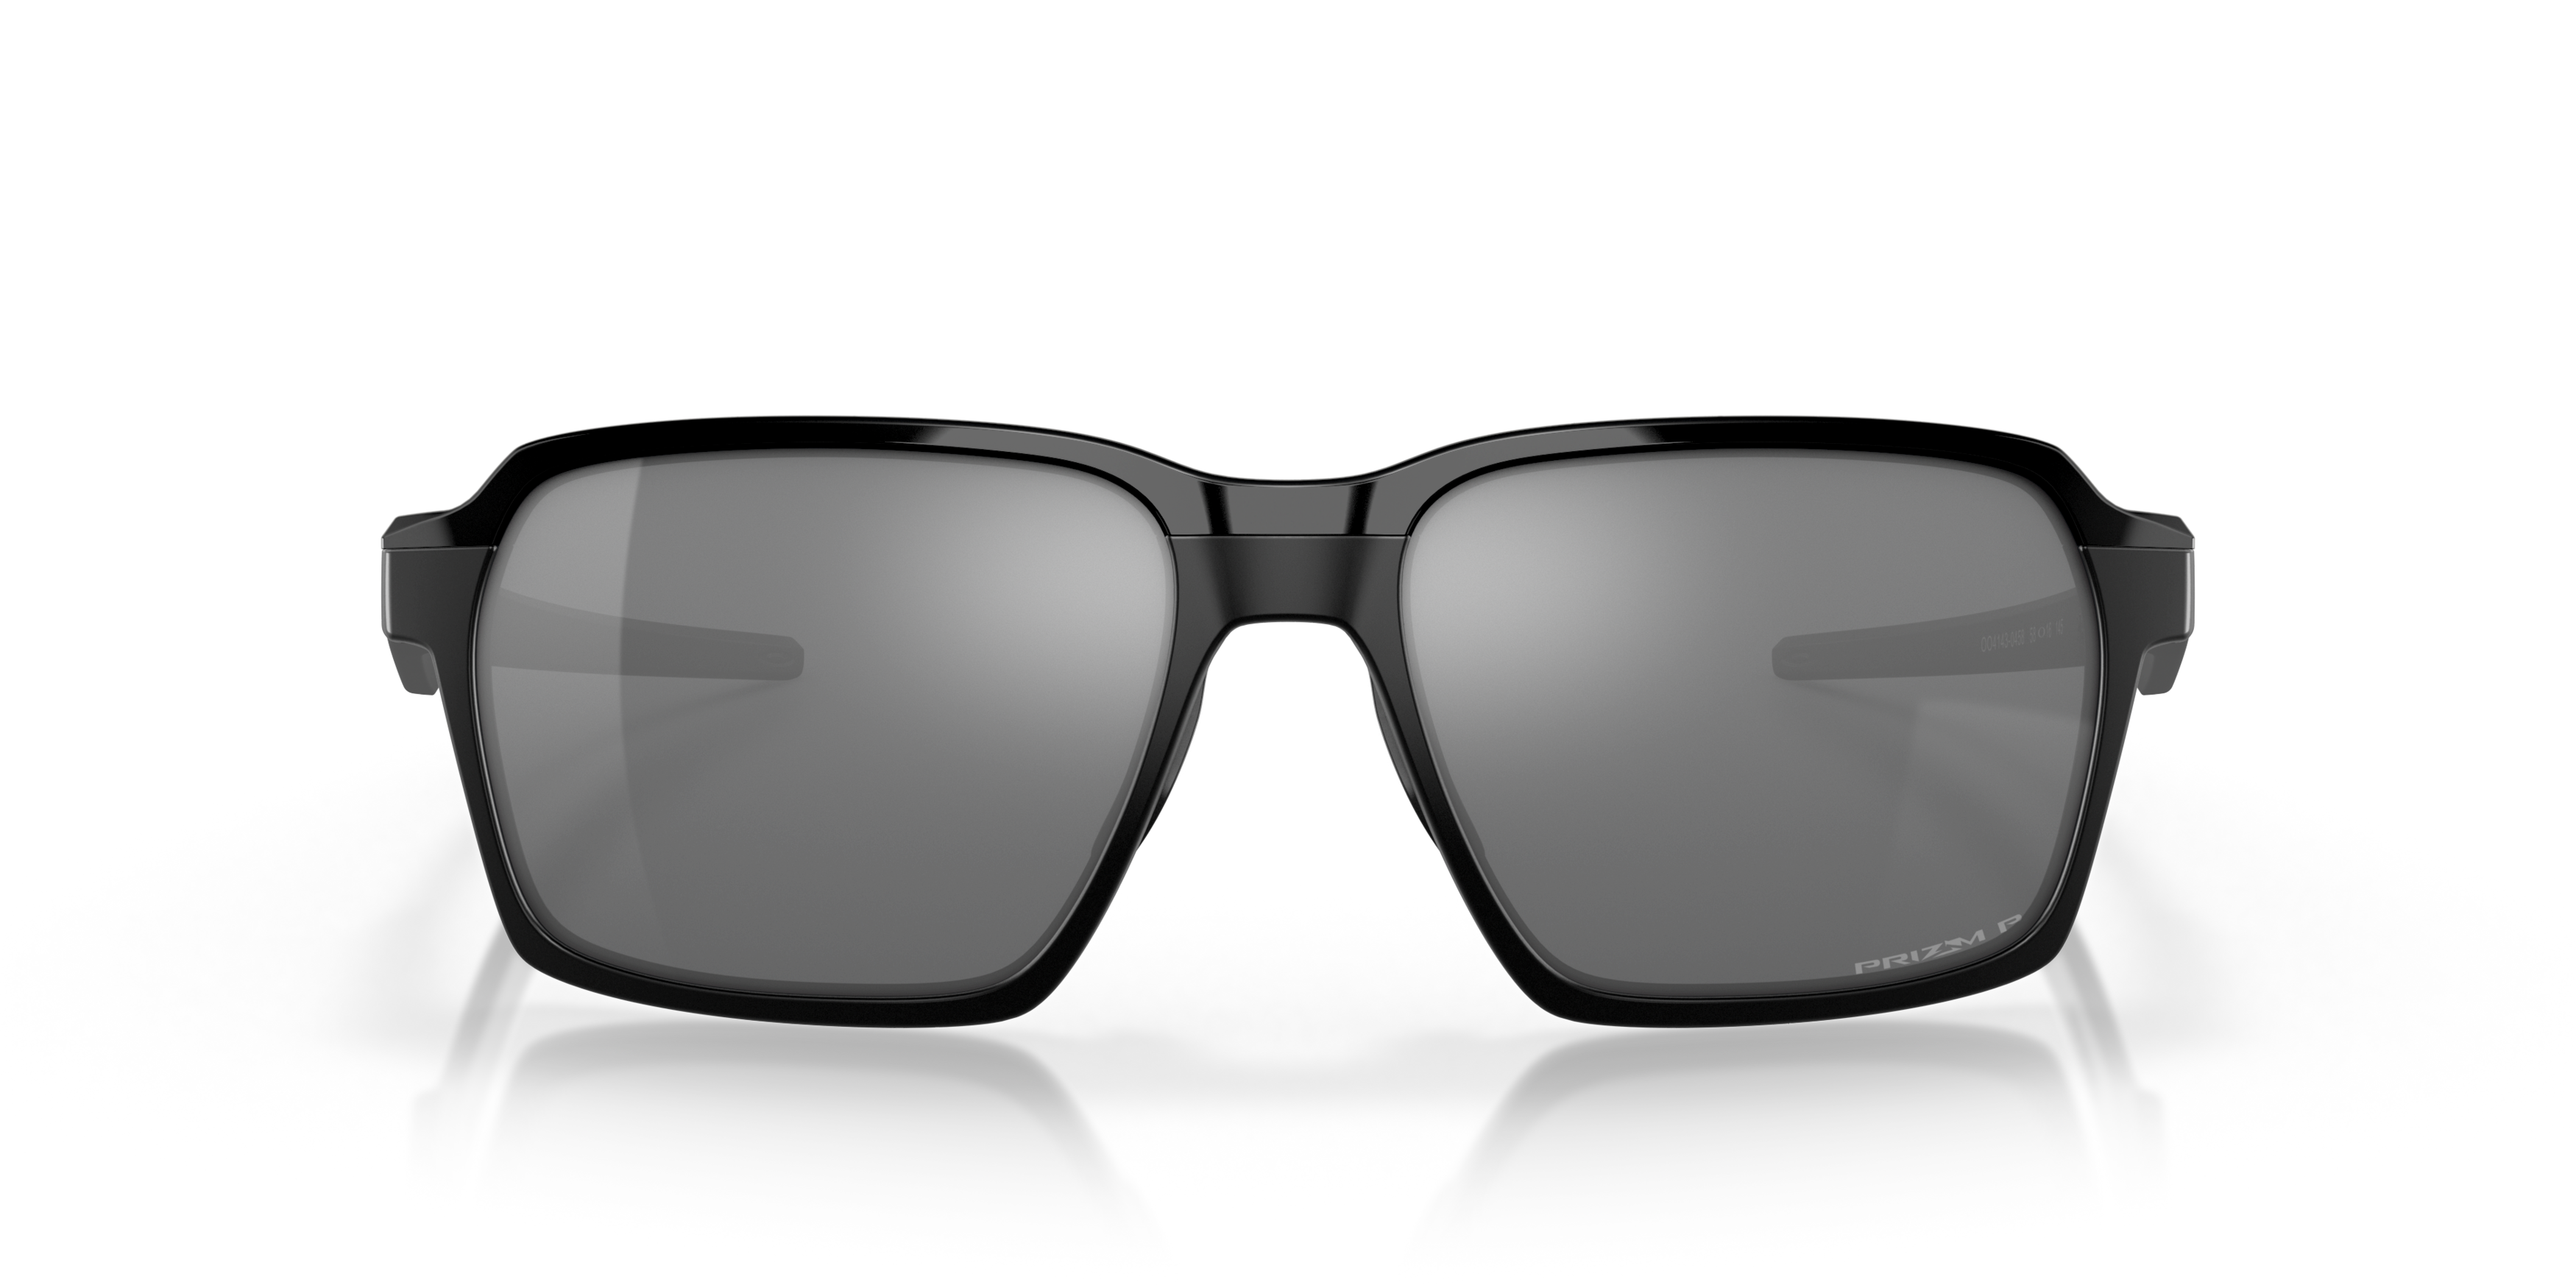 [products.image.front] Oakley 0OO4143 414304